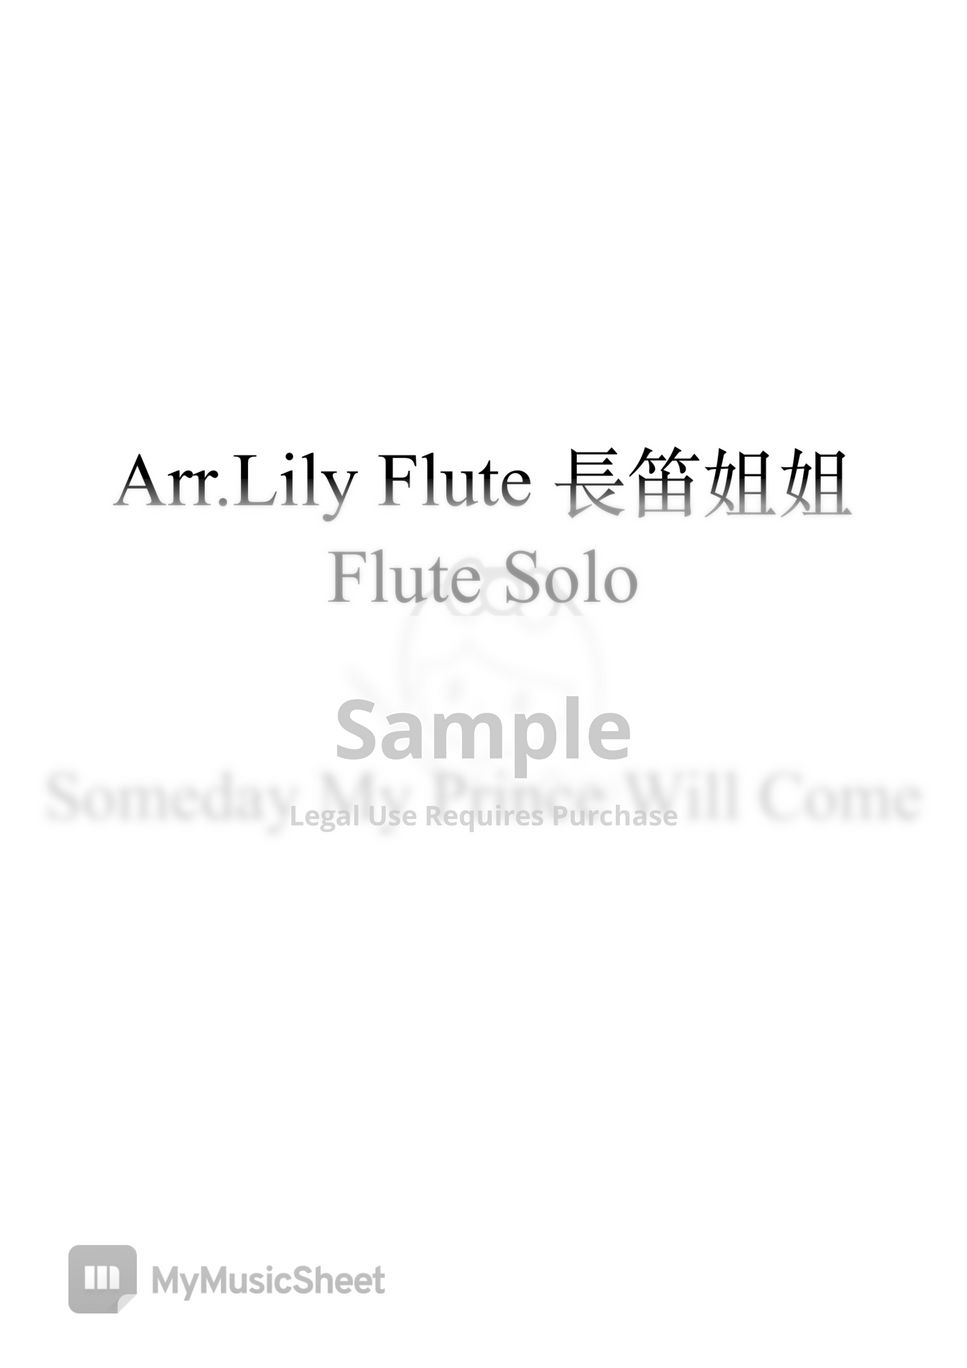 Concertino for Flute - Someday my prince will come (Solo) by Lily Flute 長笛姐姐